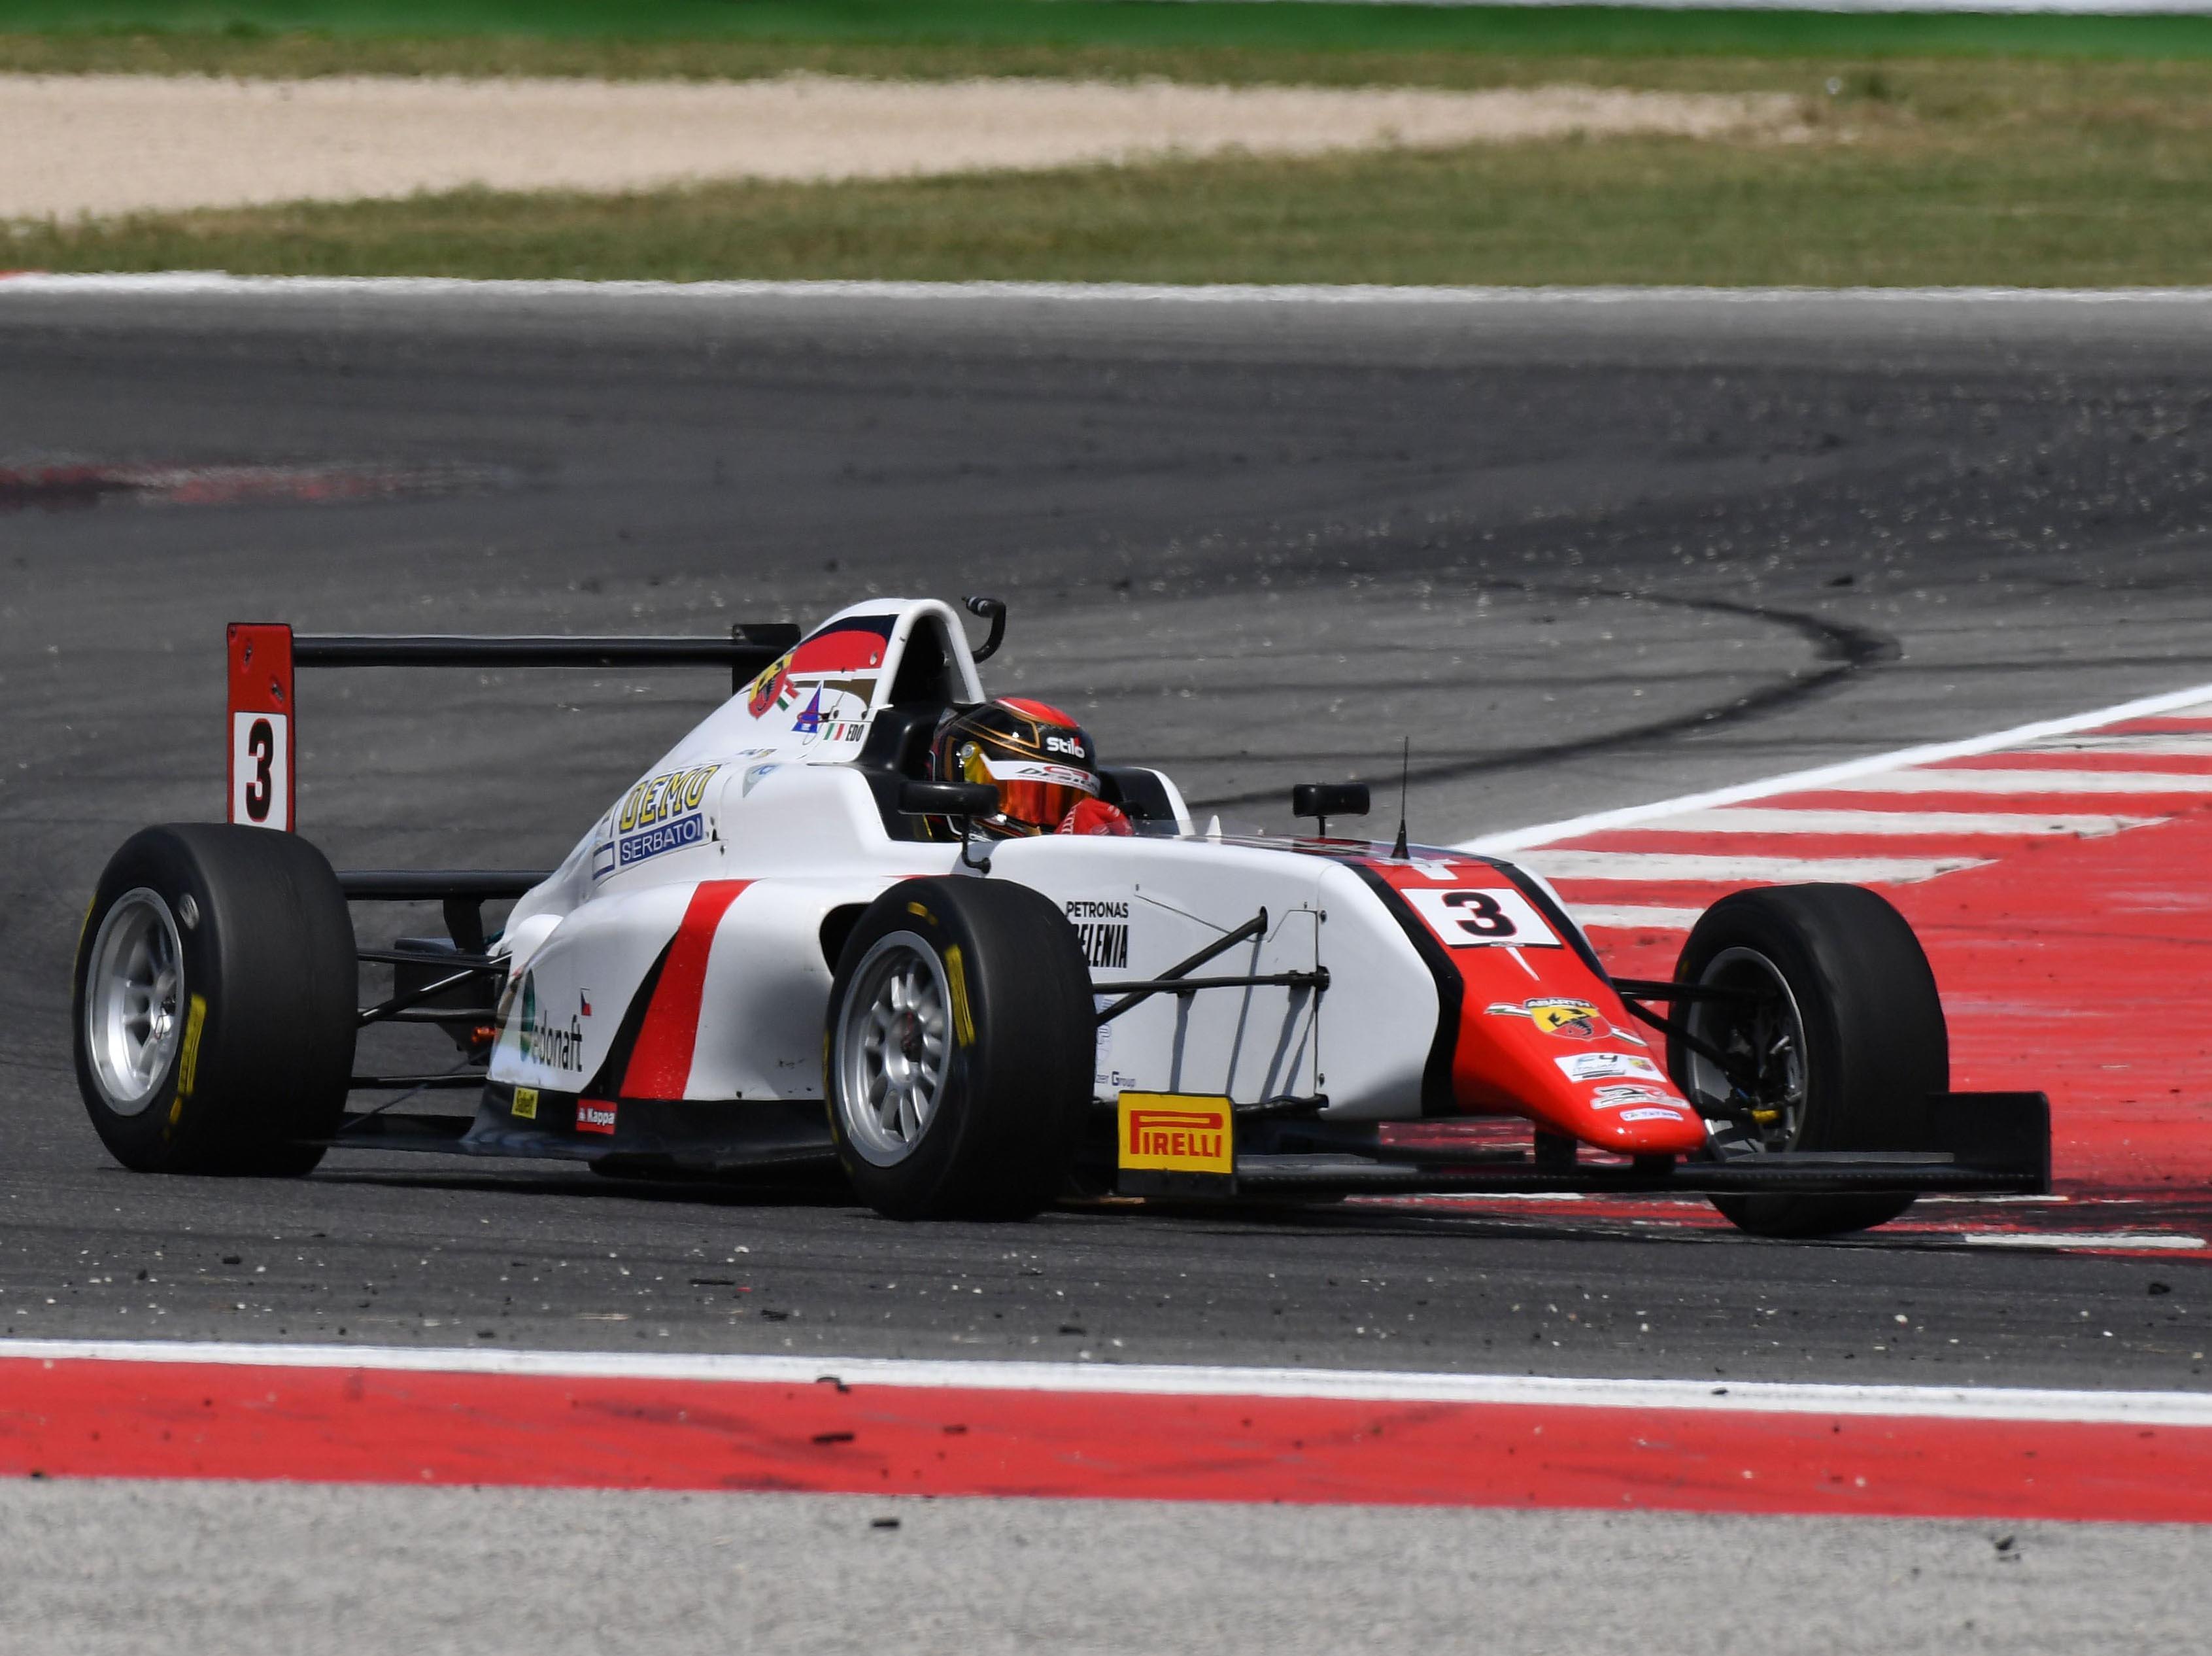 Good recovery for Morricone at Misano F4